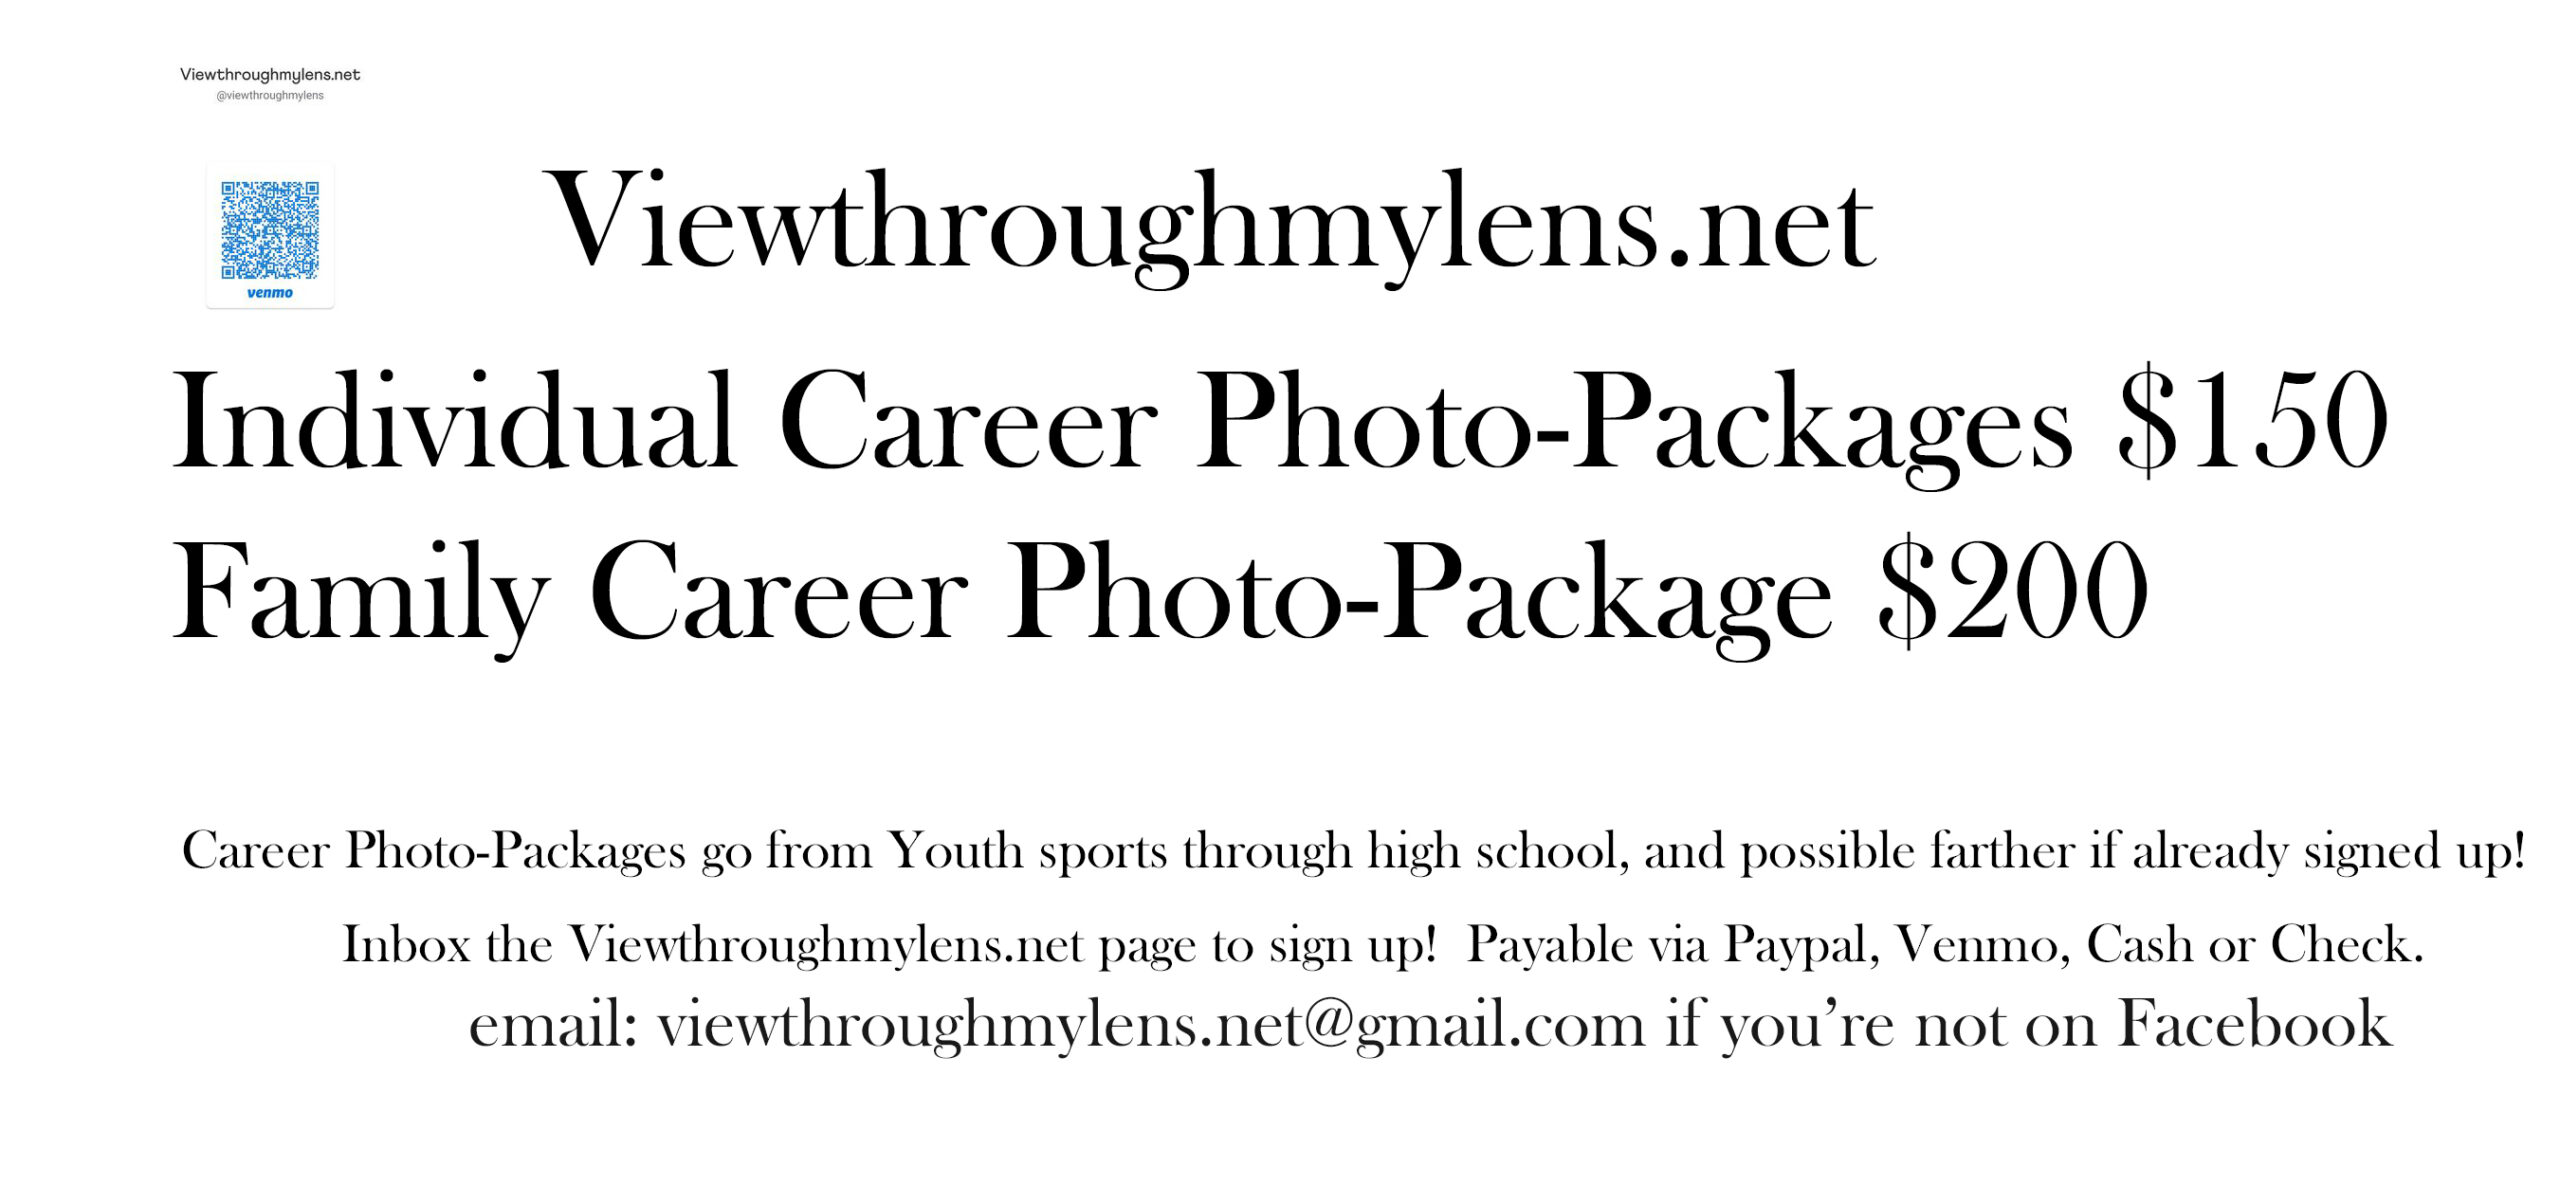 Career Photo-Packages